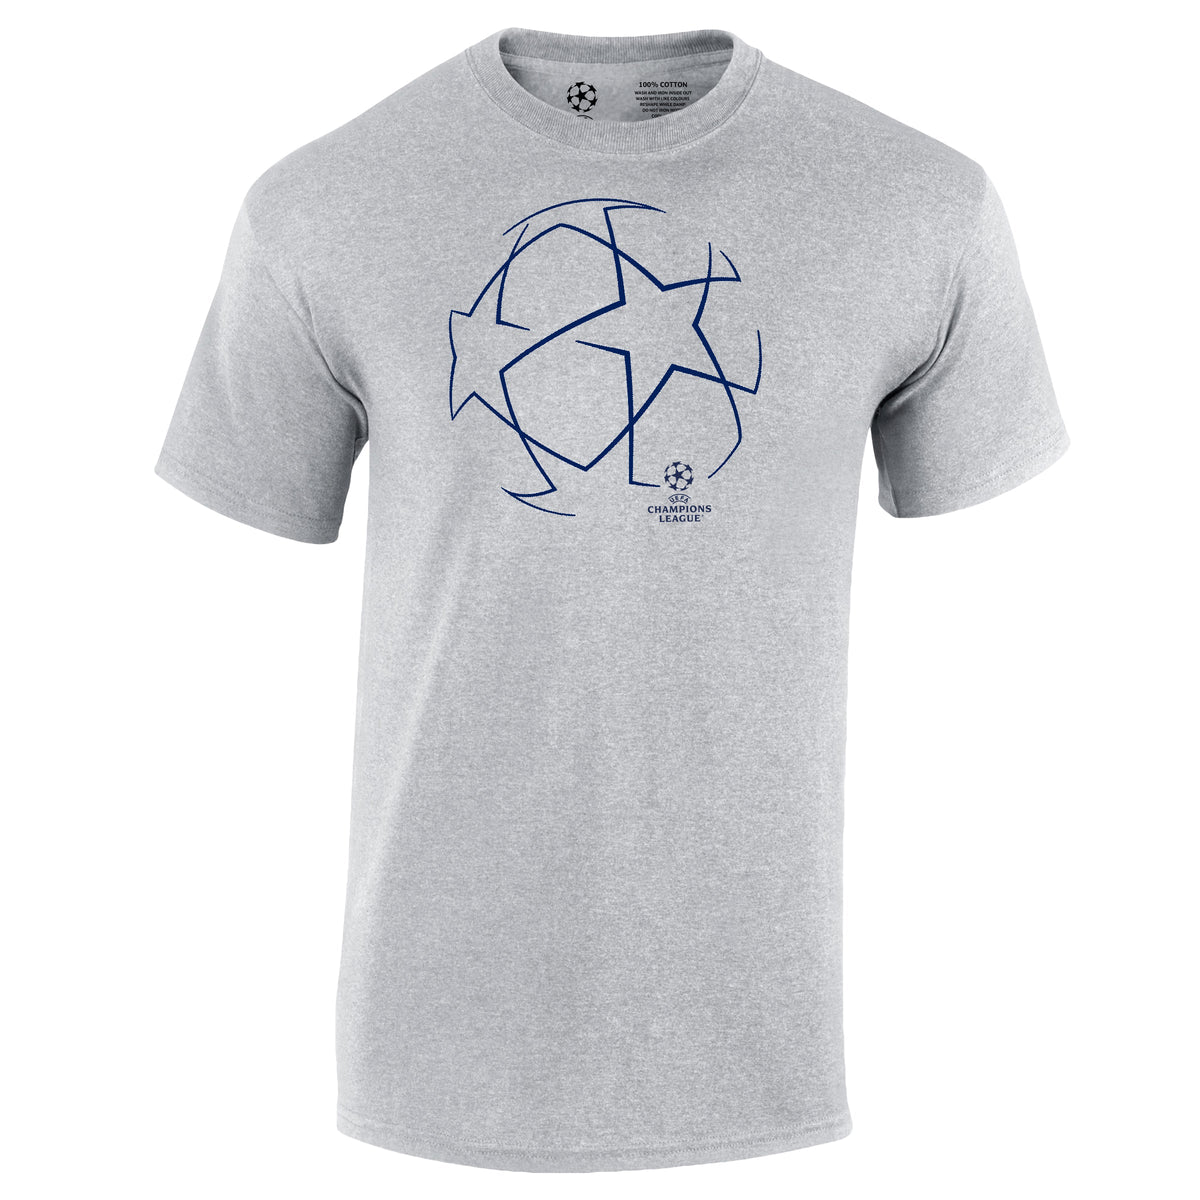 Champions League Starball T-Shirt Grey